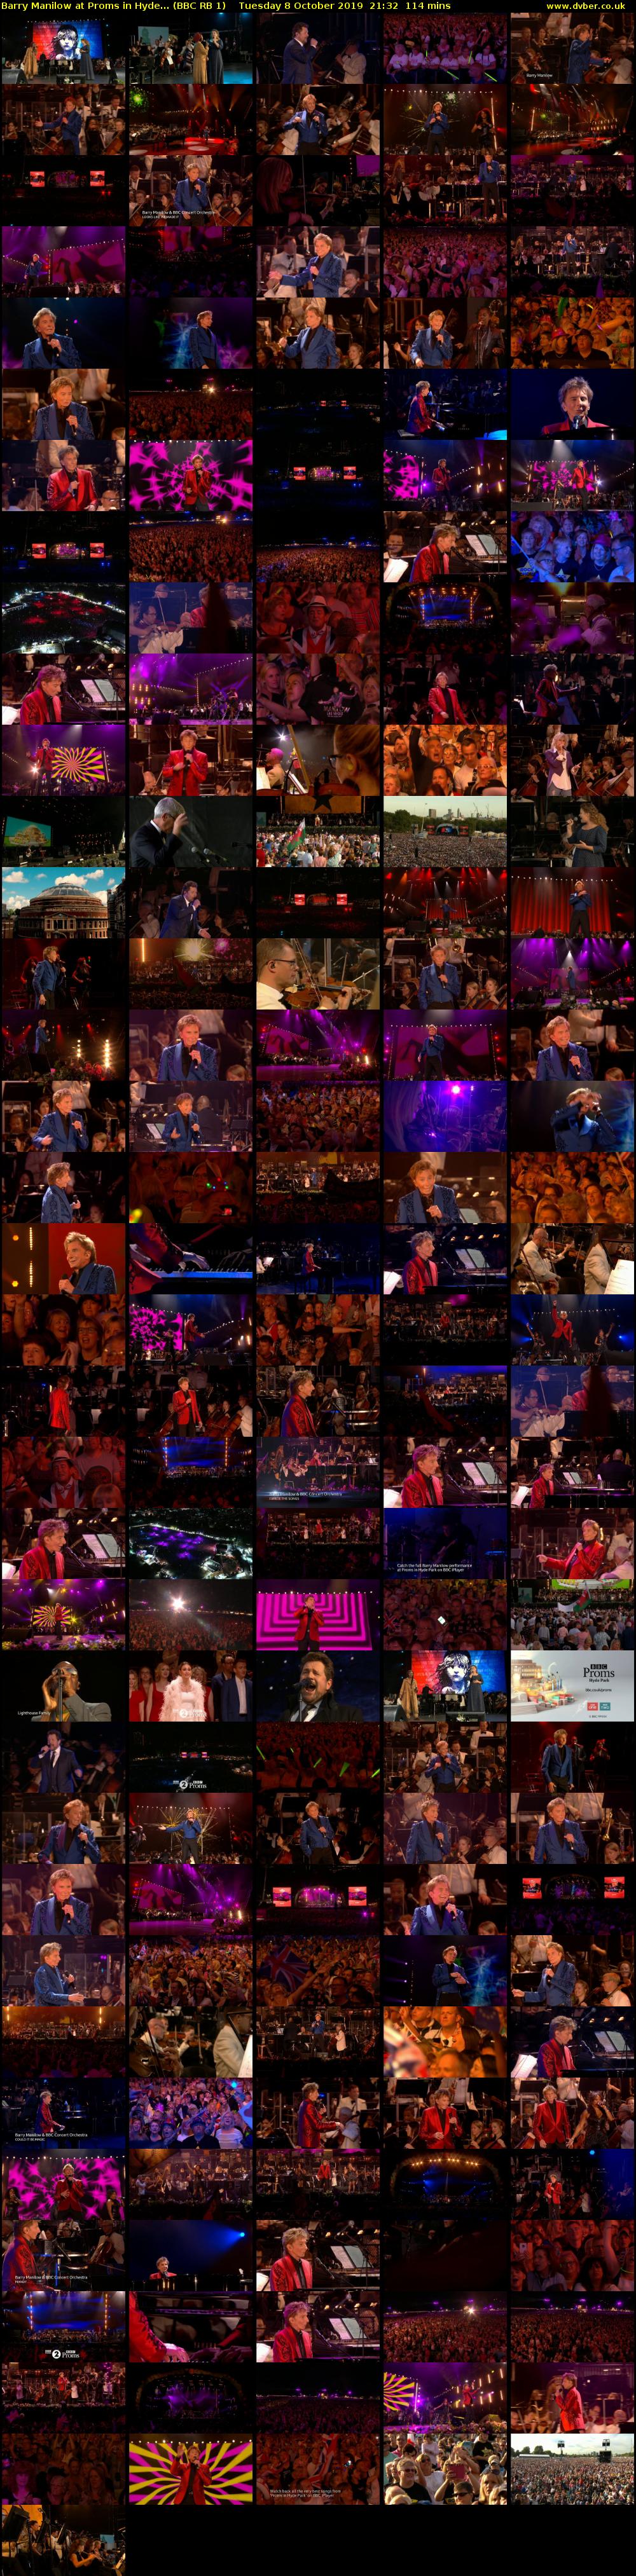 Barry Manilow at Proms in Hyde... (BBC RB 1) Tuesday 8 October 2019 21:32 - 23:26